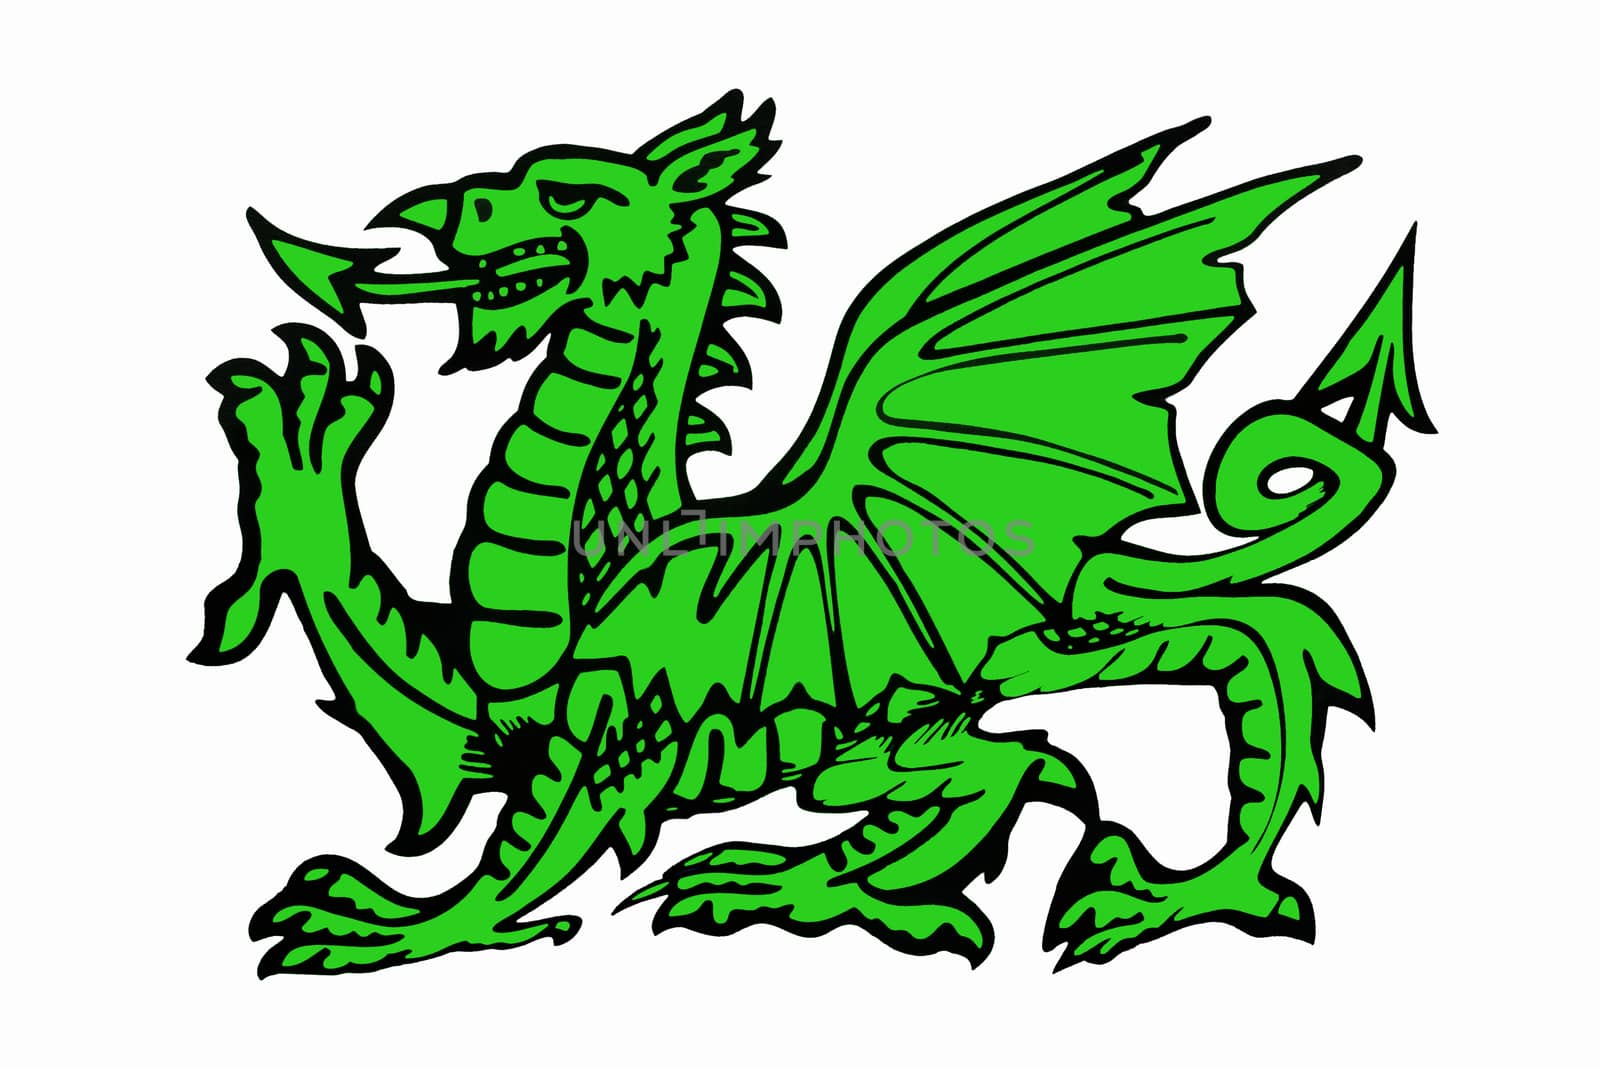 The green dragon of Wales - The Welsh Dragon appears on the national flag of Wales (in red). The flag is also called Y Ddraig Goch. The oldest recorded use of the dragon to symbolise Wales is in the Historia Brittonum, written around AD 829.